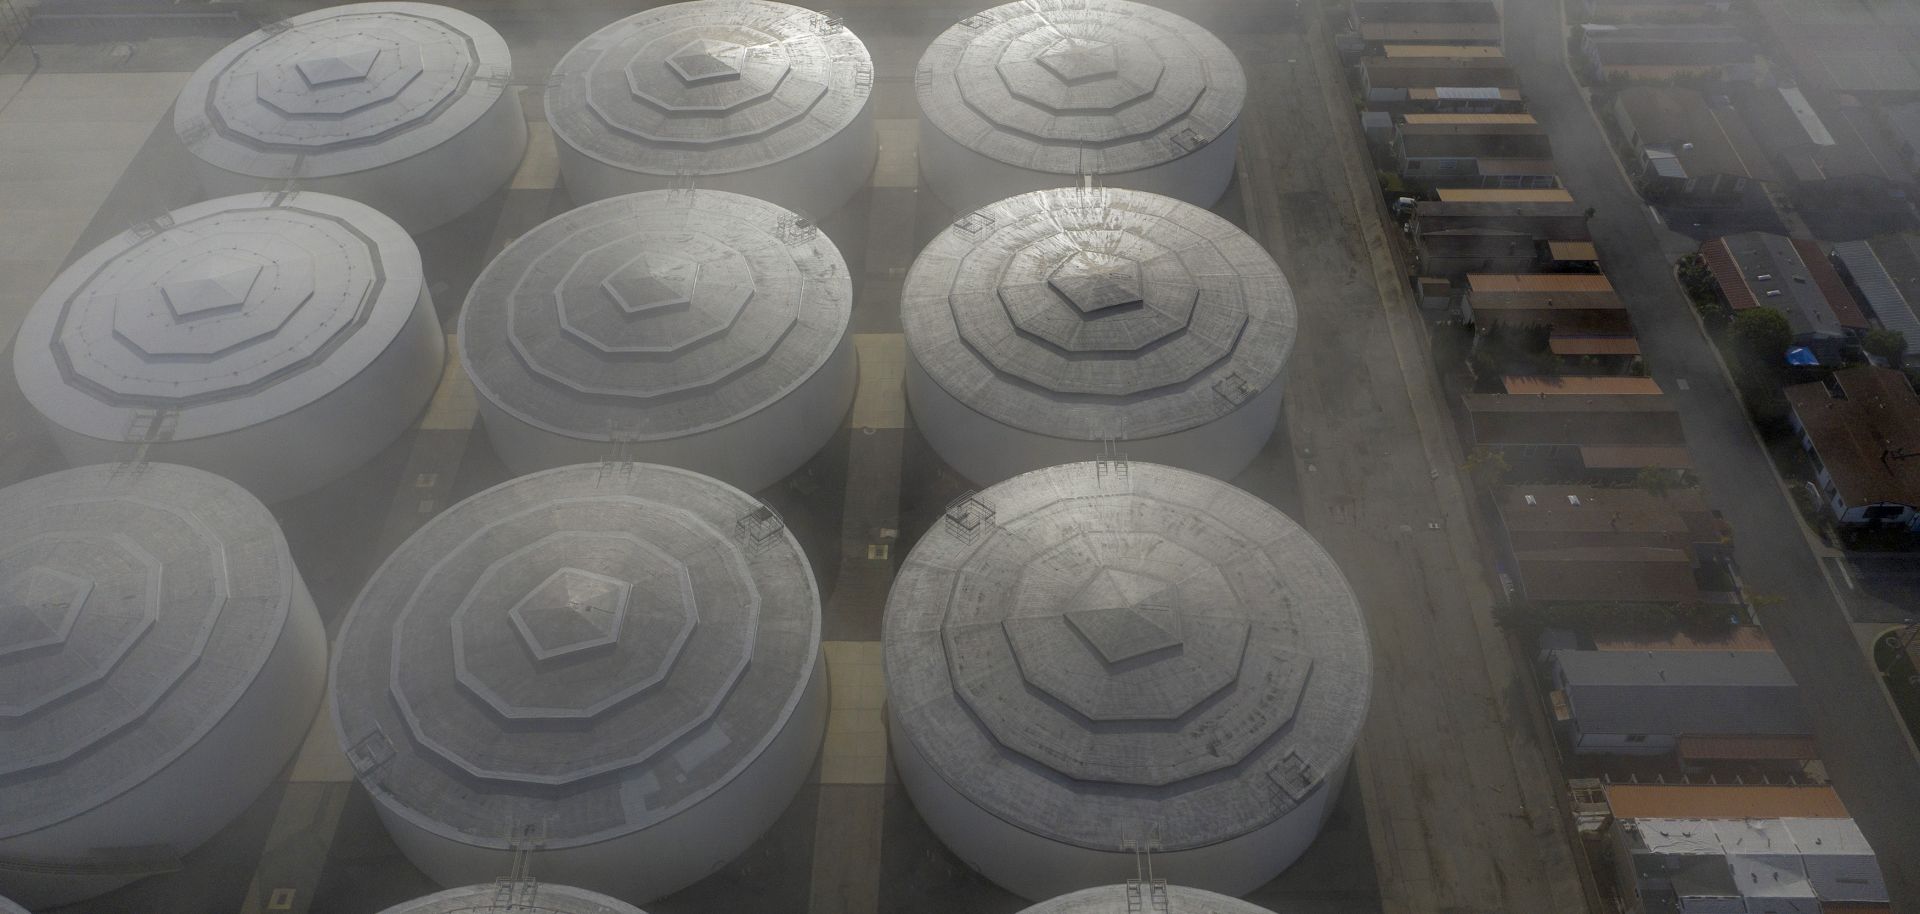 A tank farm on April 26, 2020, in the East Rancho Dominguez section of Compton, California.